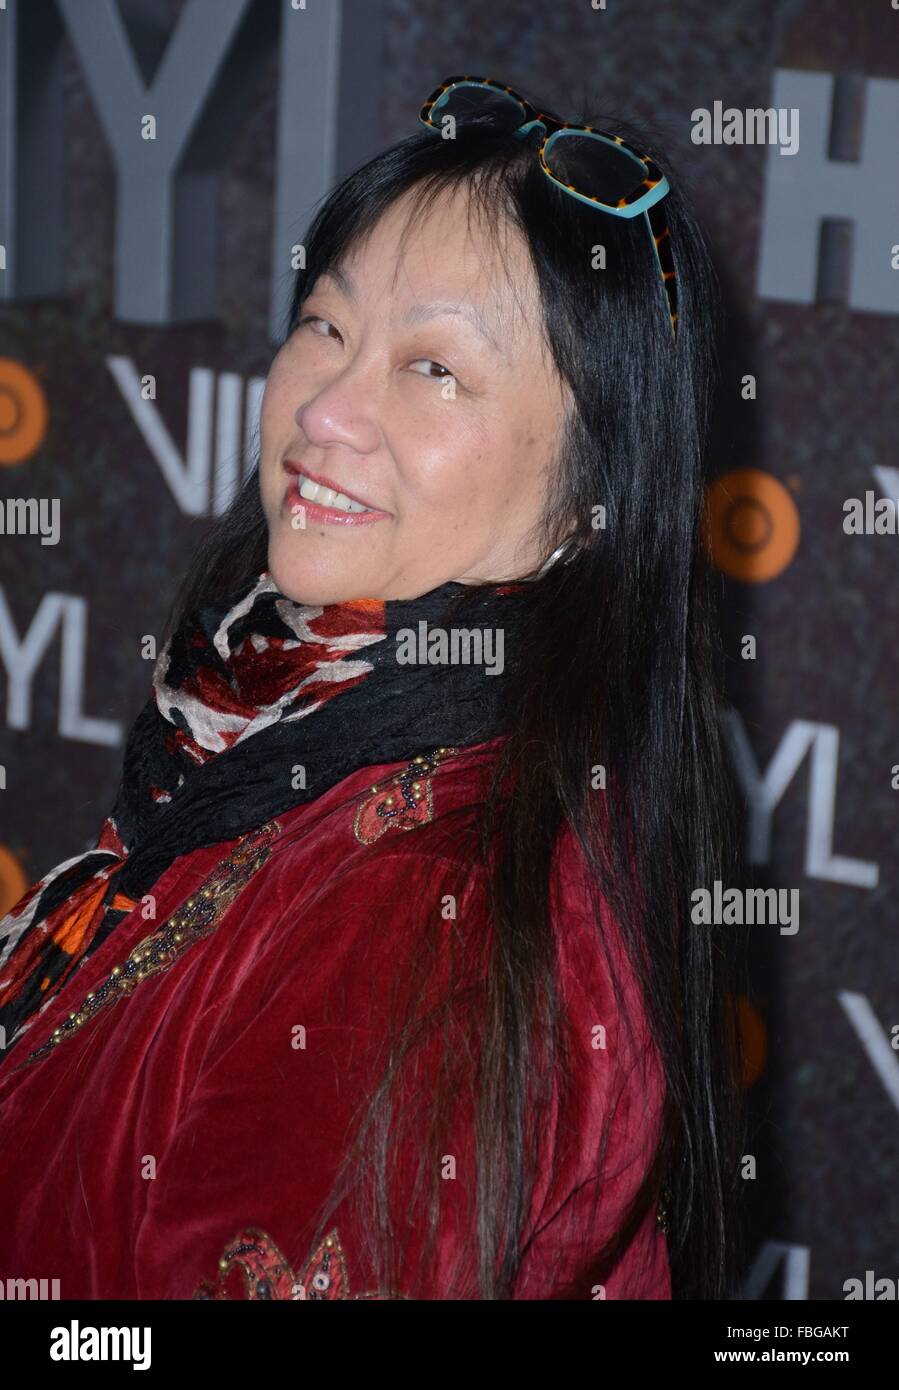 New York, NY, USA. 15th Jan, 2016. May Pang at arrivals for VINYL Premiere on HBO, Ziegfeld Theatre, New York, NY January 15, 2016. Credit:  Derek Storm/Everett Collection/Alamy Live News Stock Photo